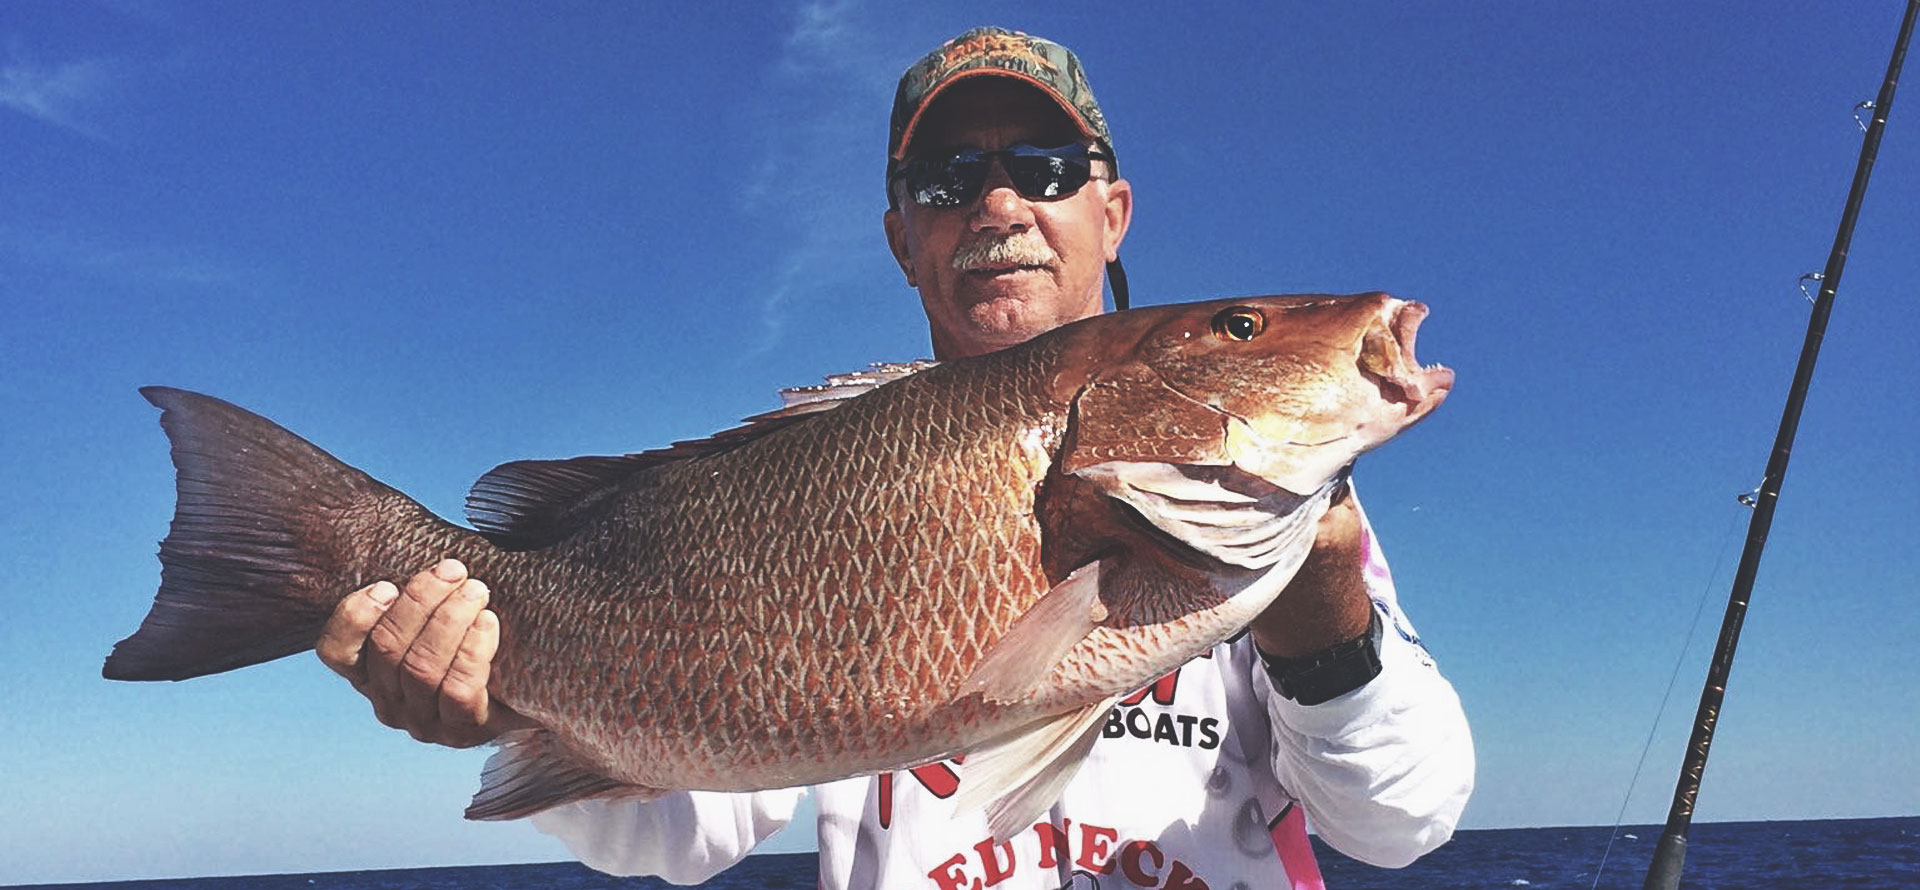 j-hook-fishing-charters-st-augustine-florida-snapper-tournament